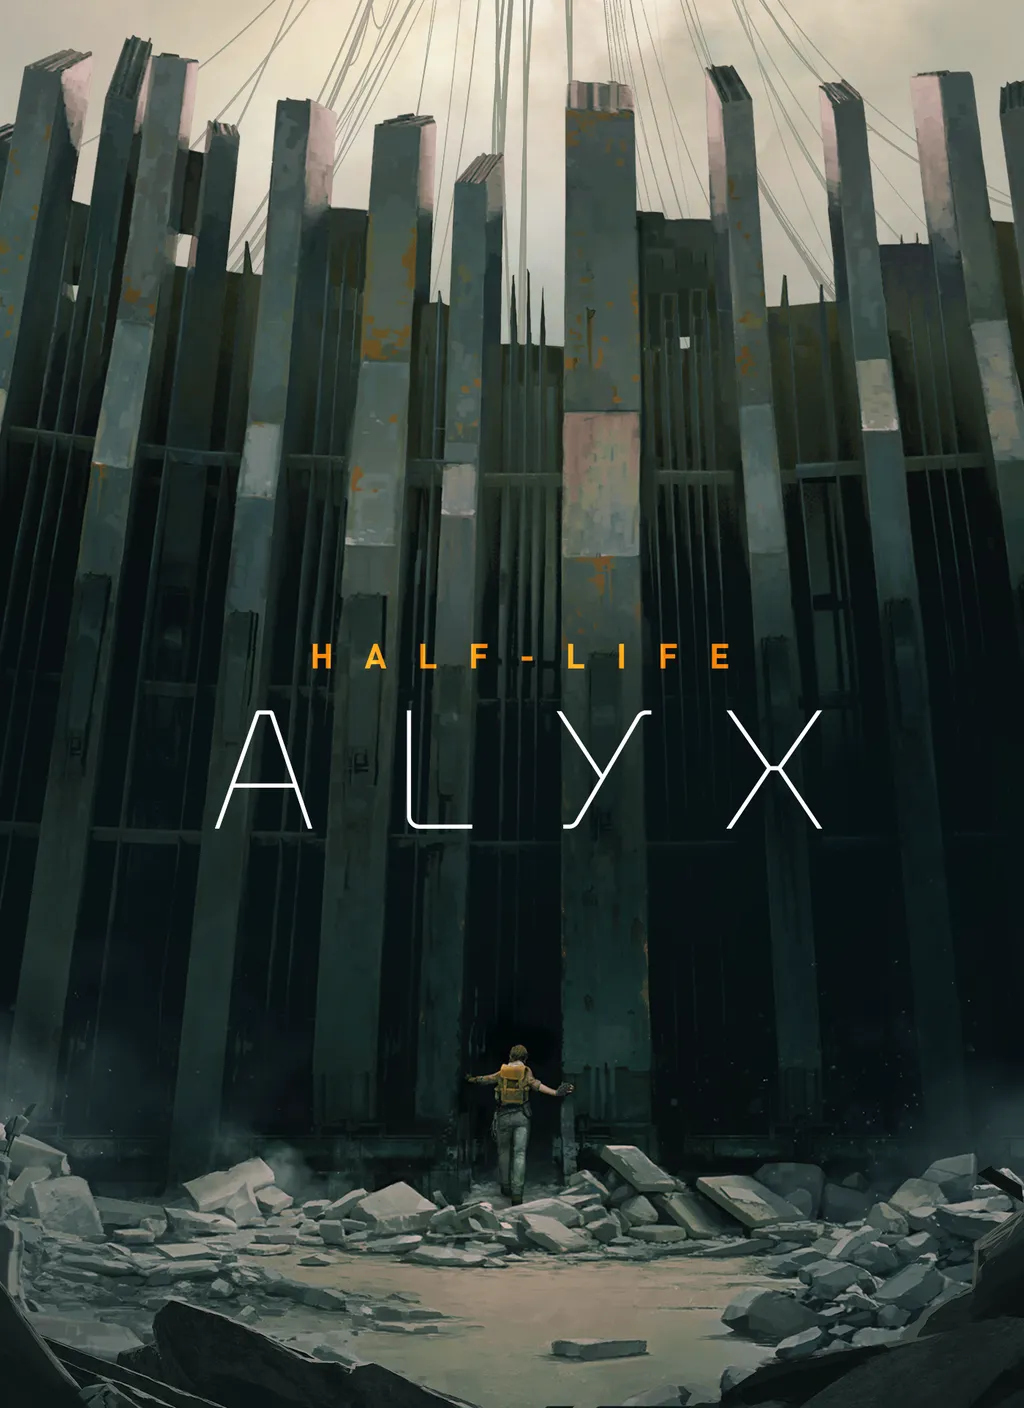 Valve Releasing Half-Life: Alyx Home Environments To Index Buyers On March 4